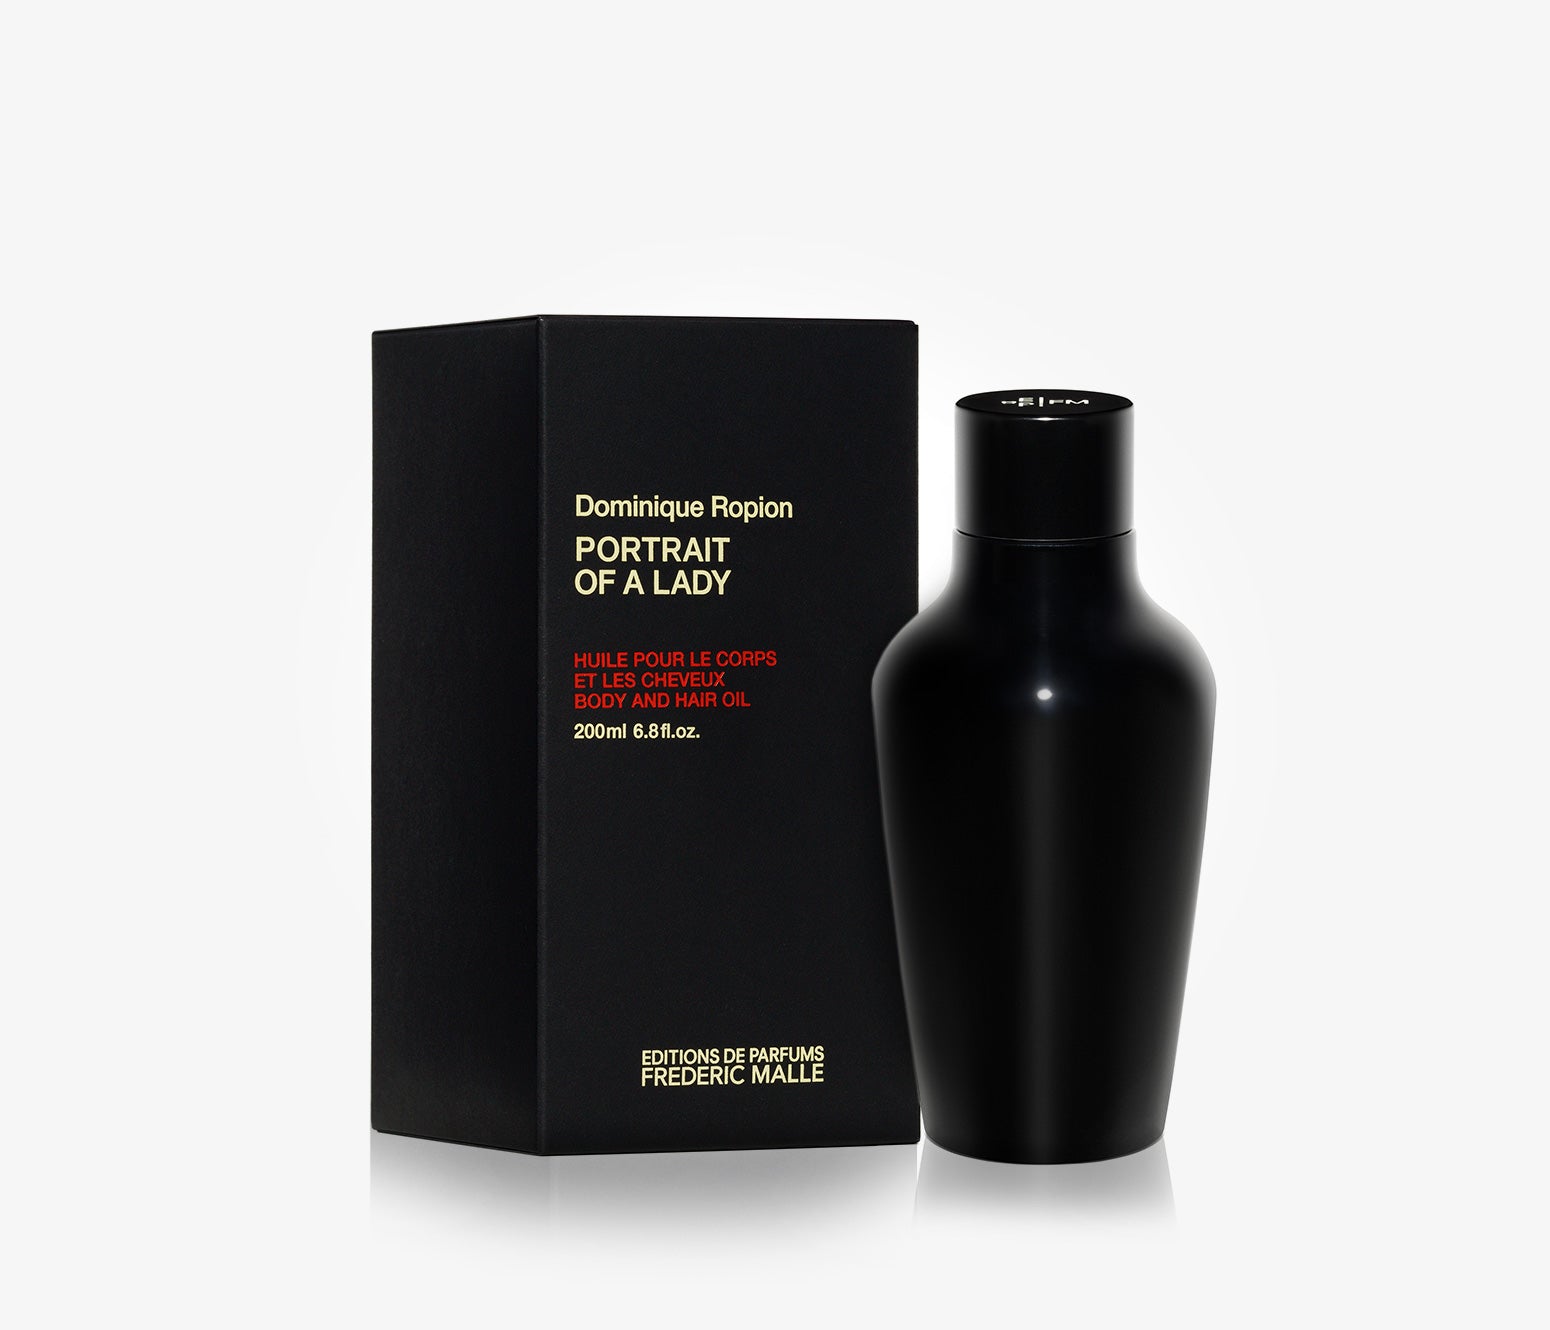 Frederic Malle - Portrait of a Lady Body & Hair Oil - 200ml - TDL001 - Product Image - Hair & Body Oil - Les Senteurs